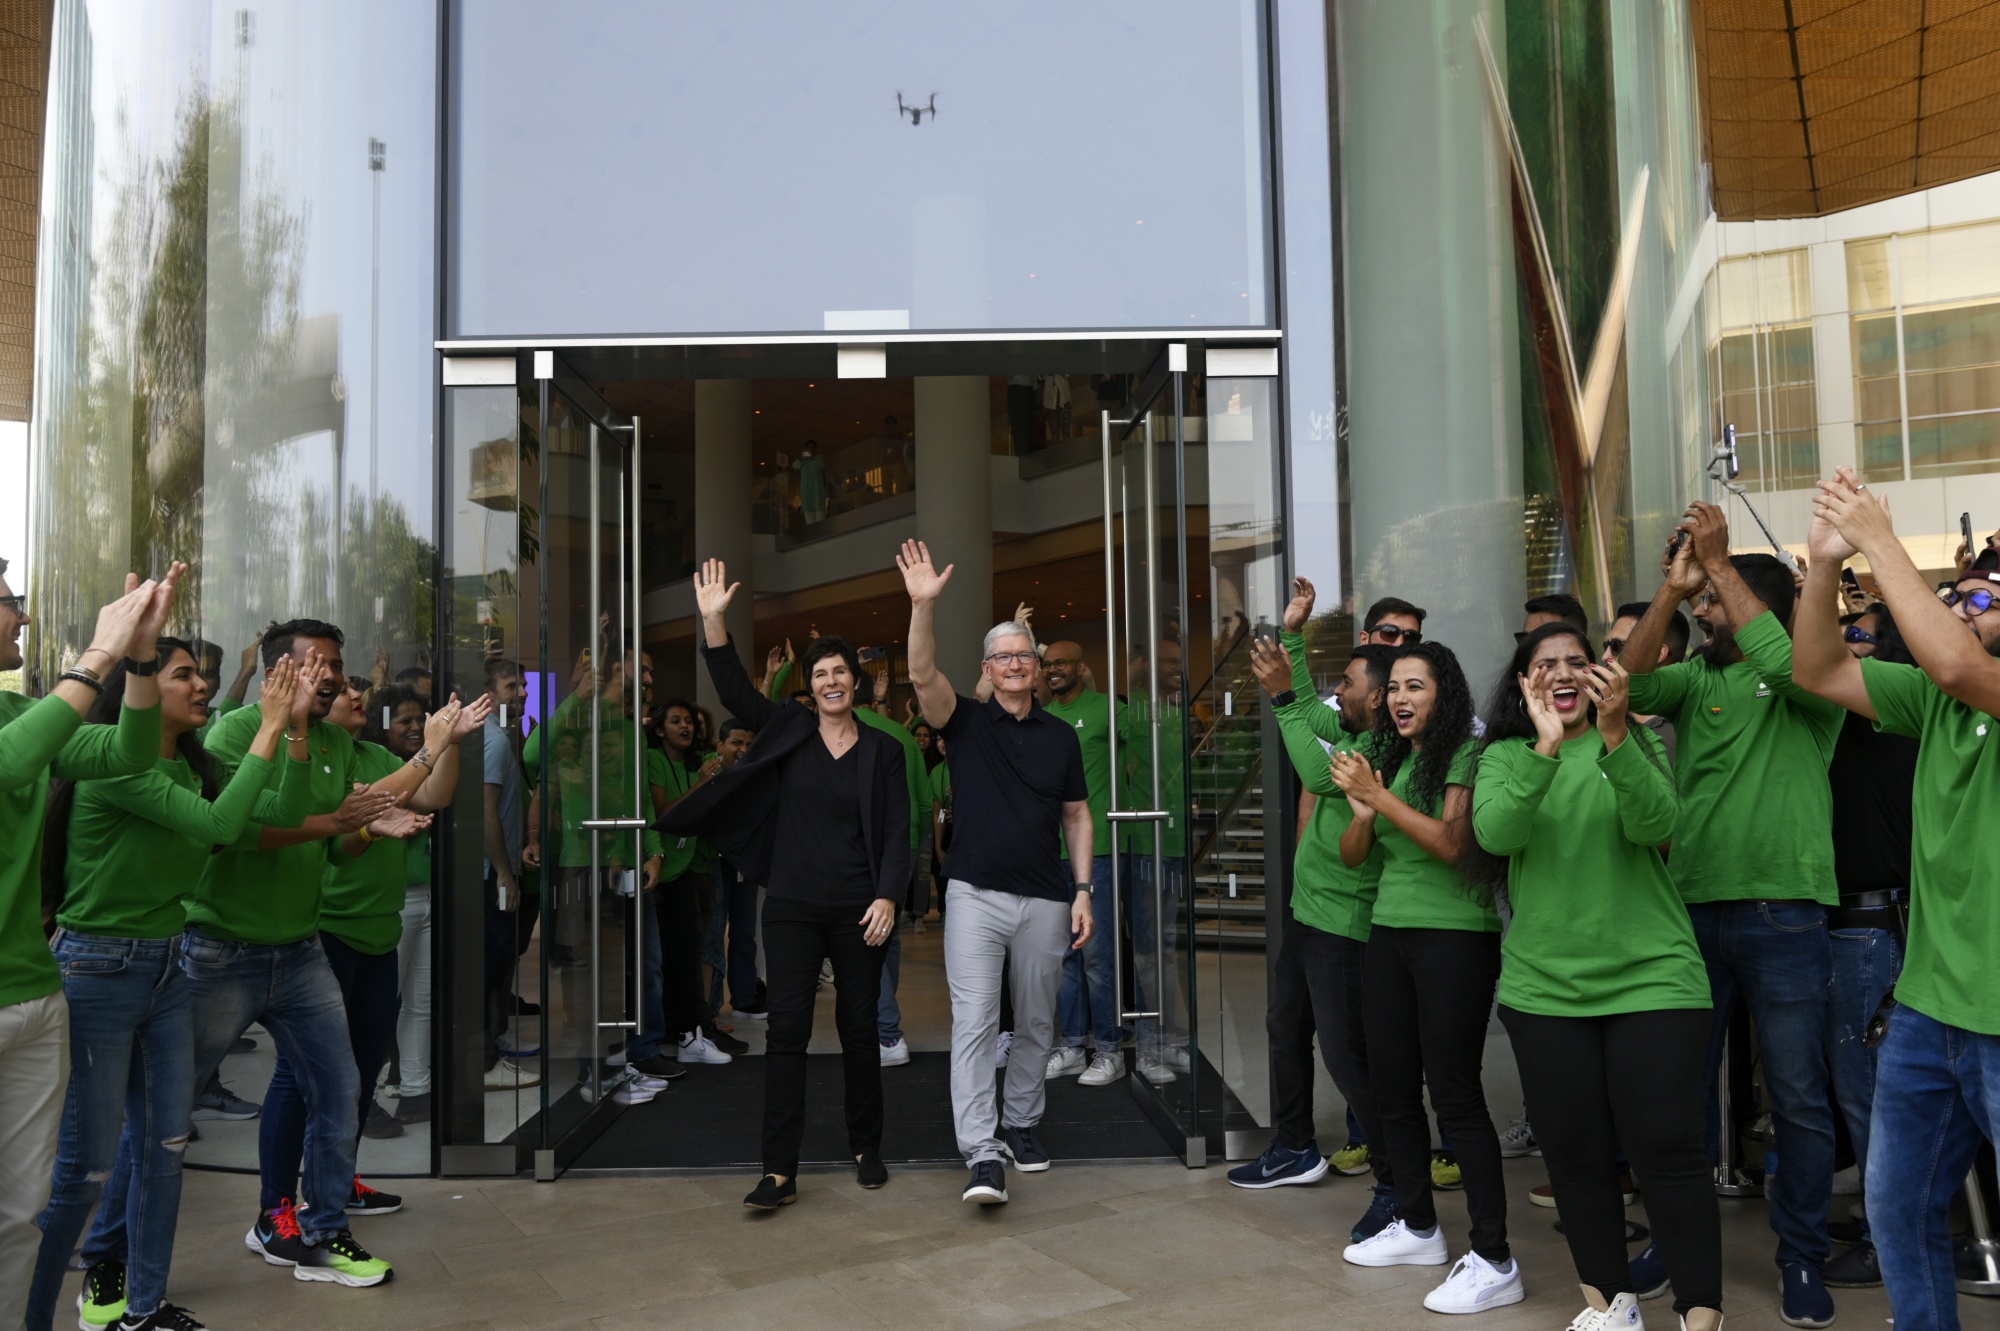 Apple Tells Staff U.S. Stores to Remain Closed Until Early May - Bloomberg